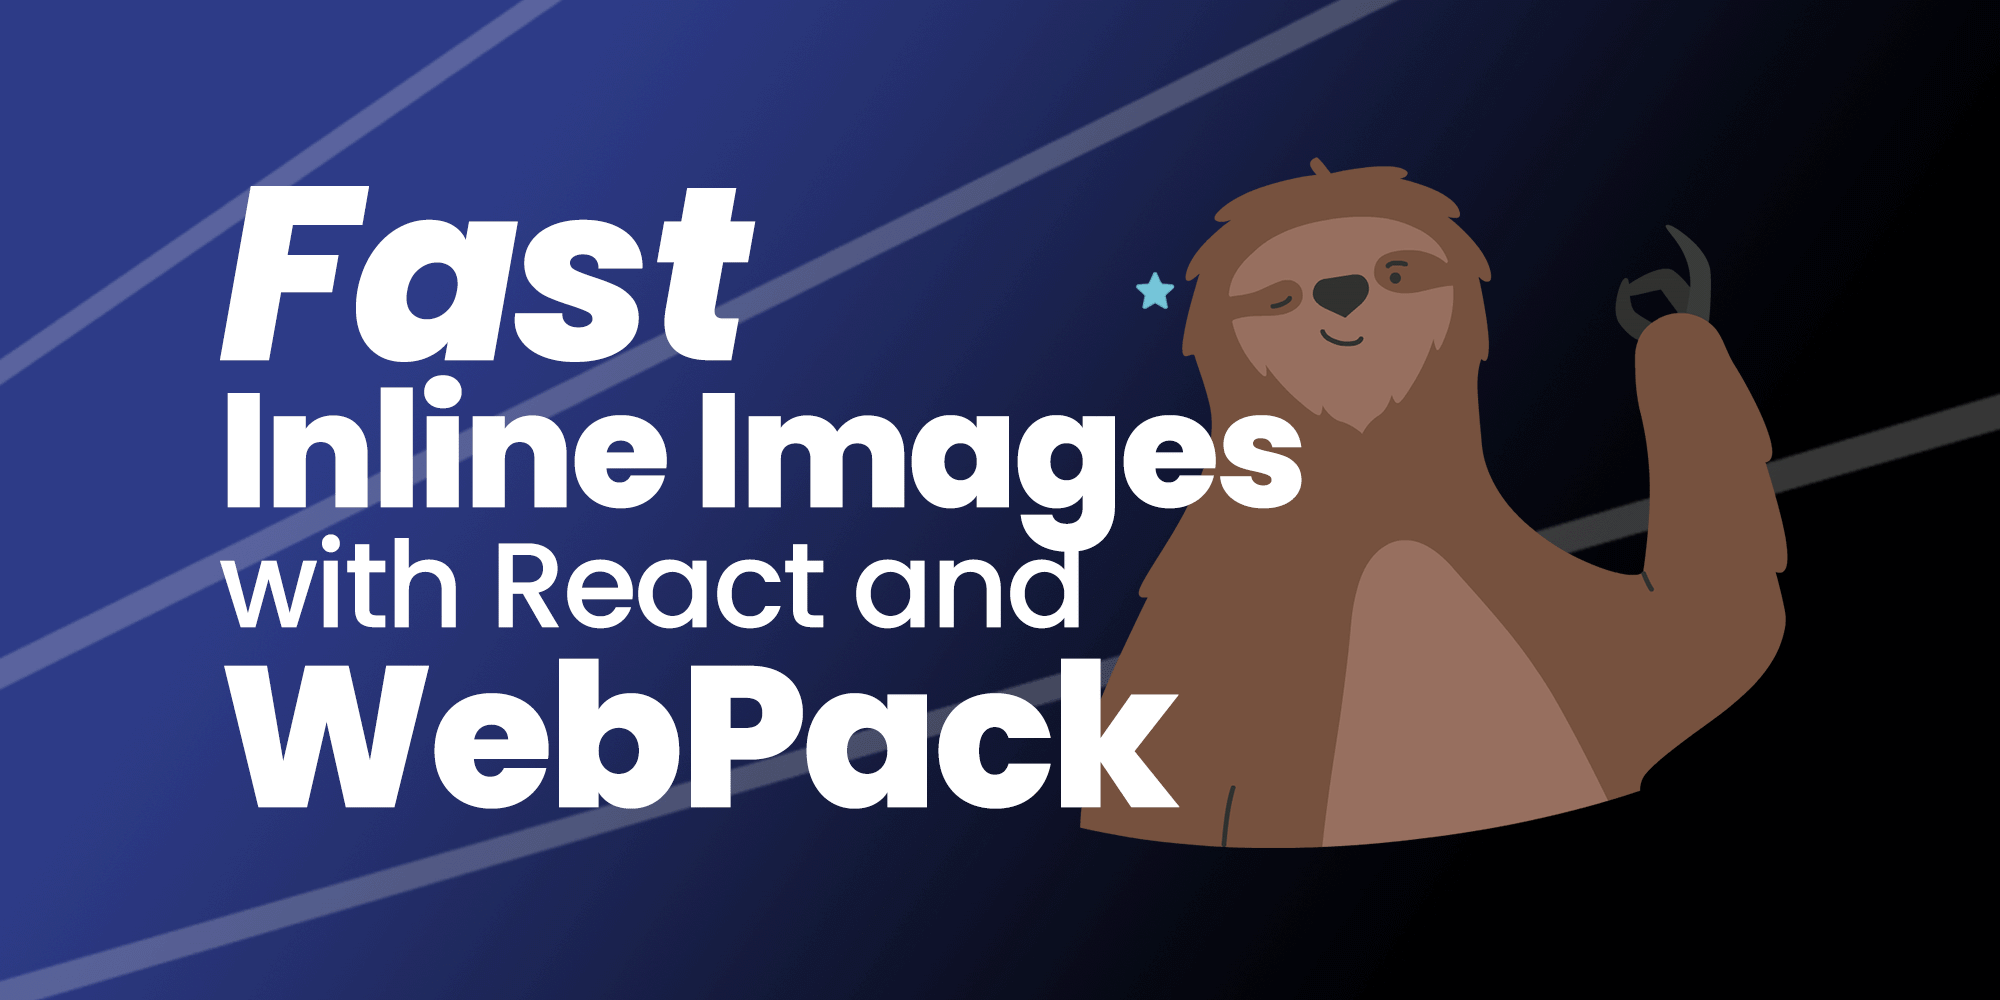 Fast Inline Images With React and Webpack